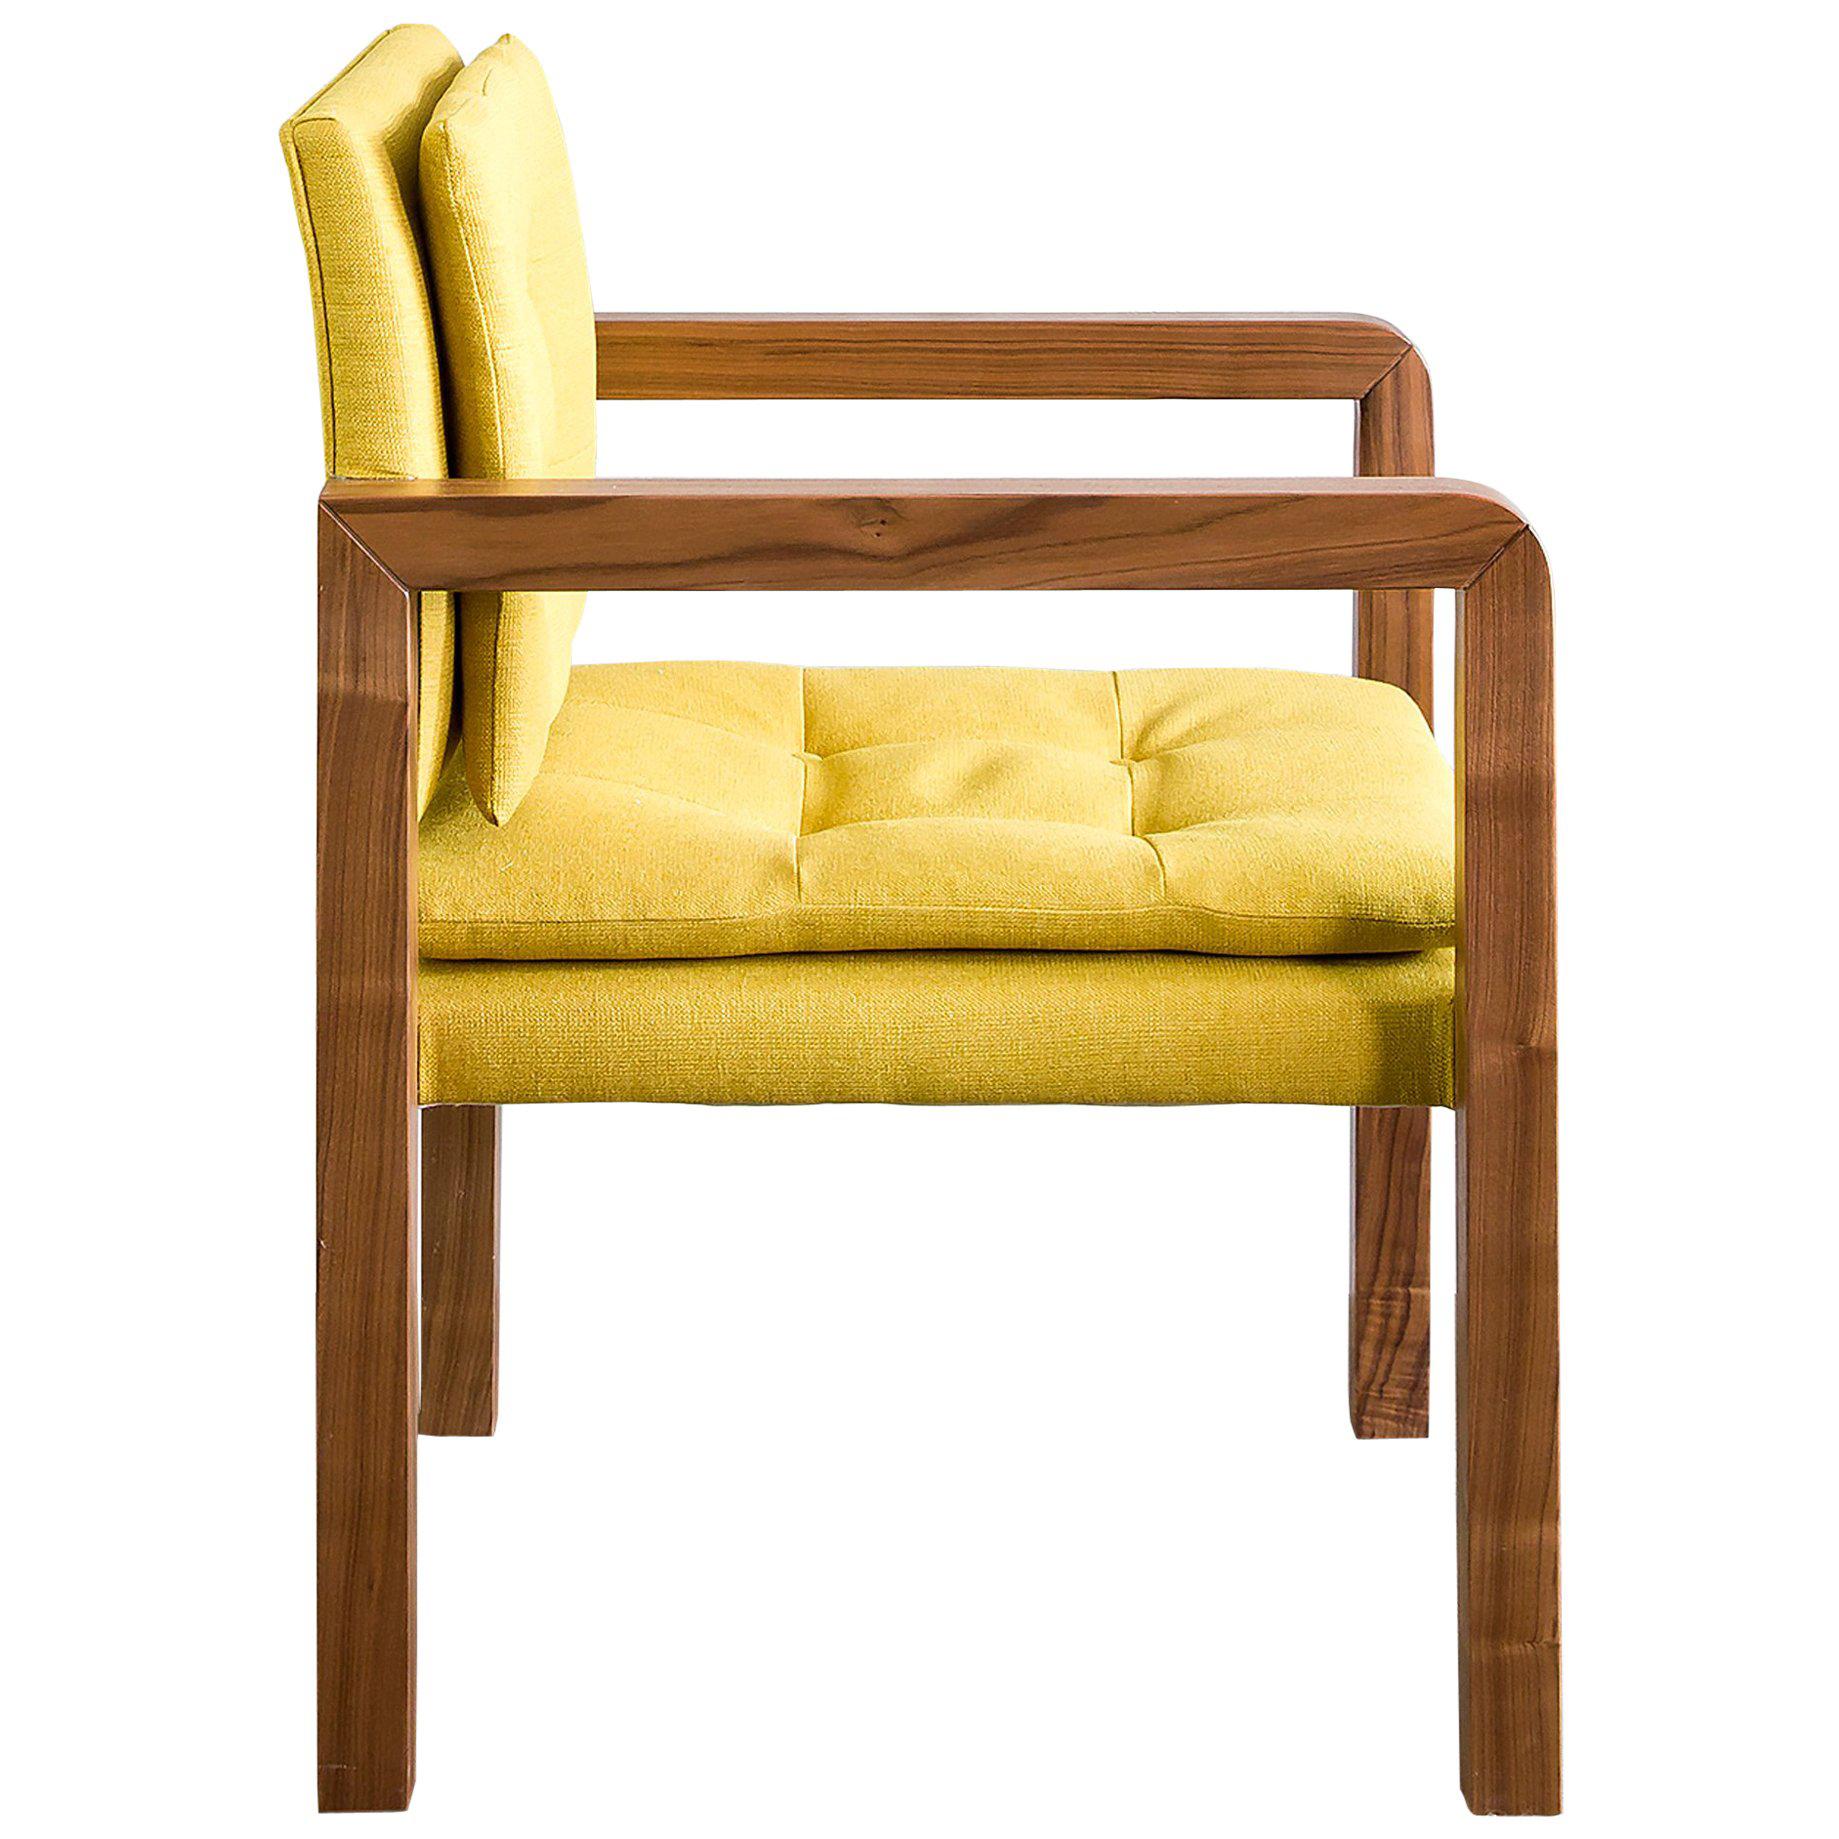 Pair of Bacco Carver Chair in Walnut Upholstered with Lino Mustard, Show Room